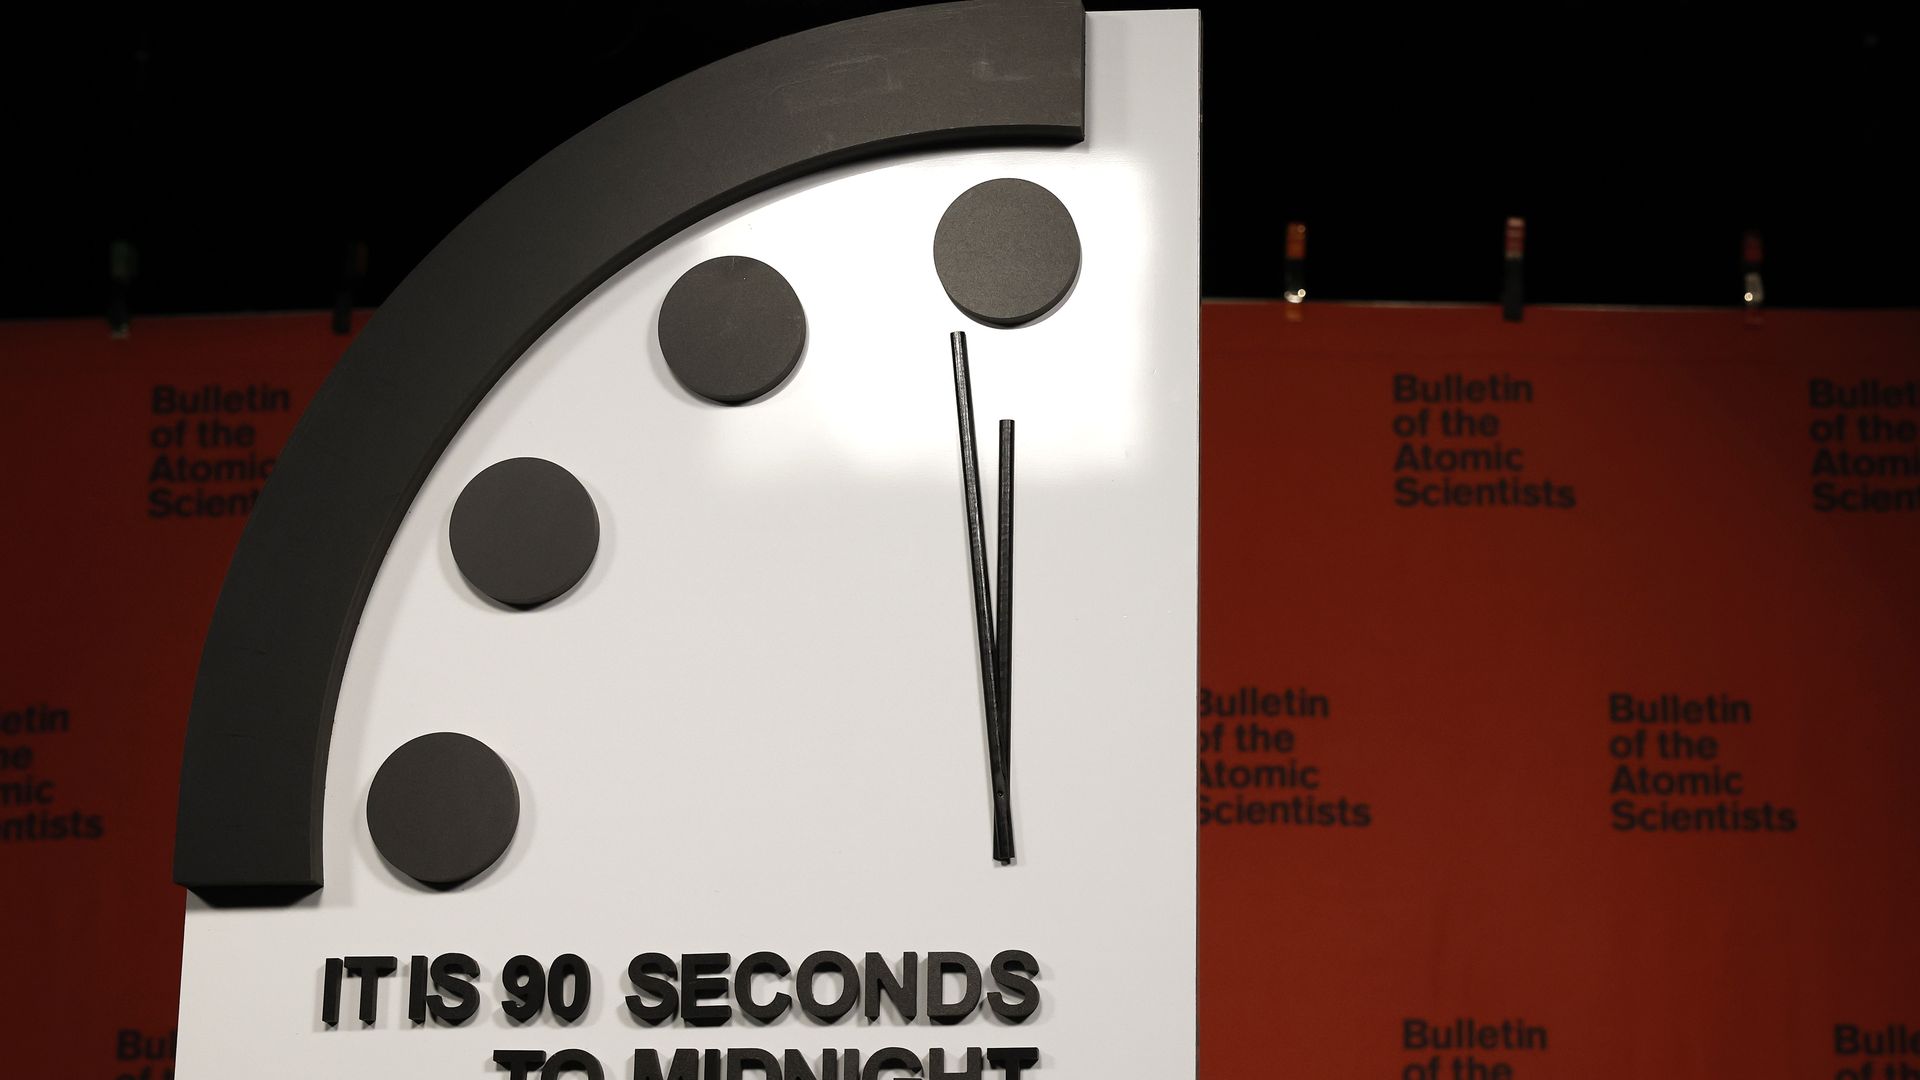 The Bulletin of the Atomic Scientists' 2023 Doomsday Clock in Washington, D.C.